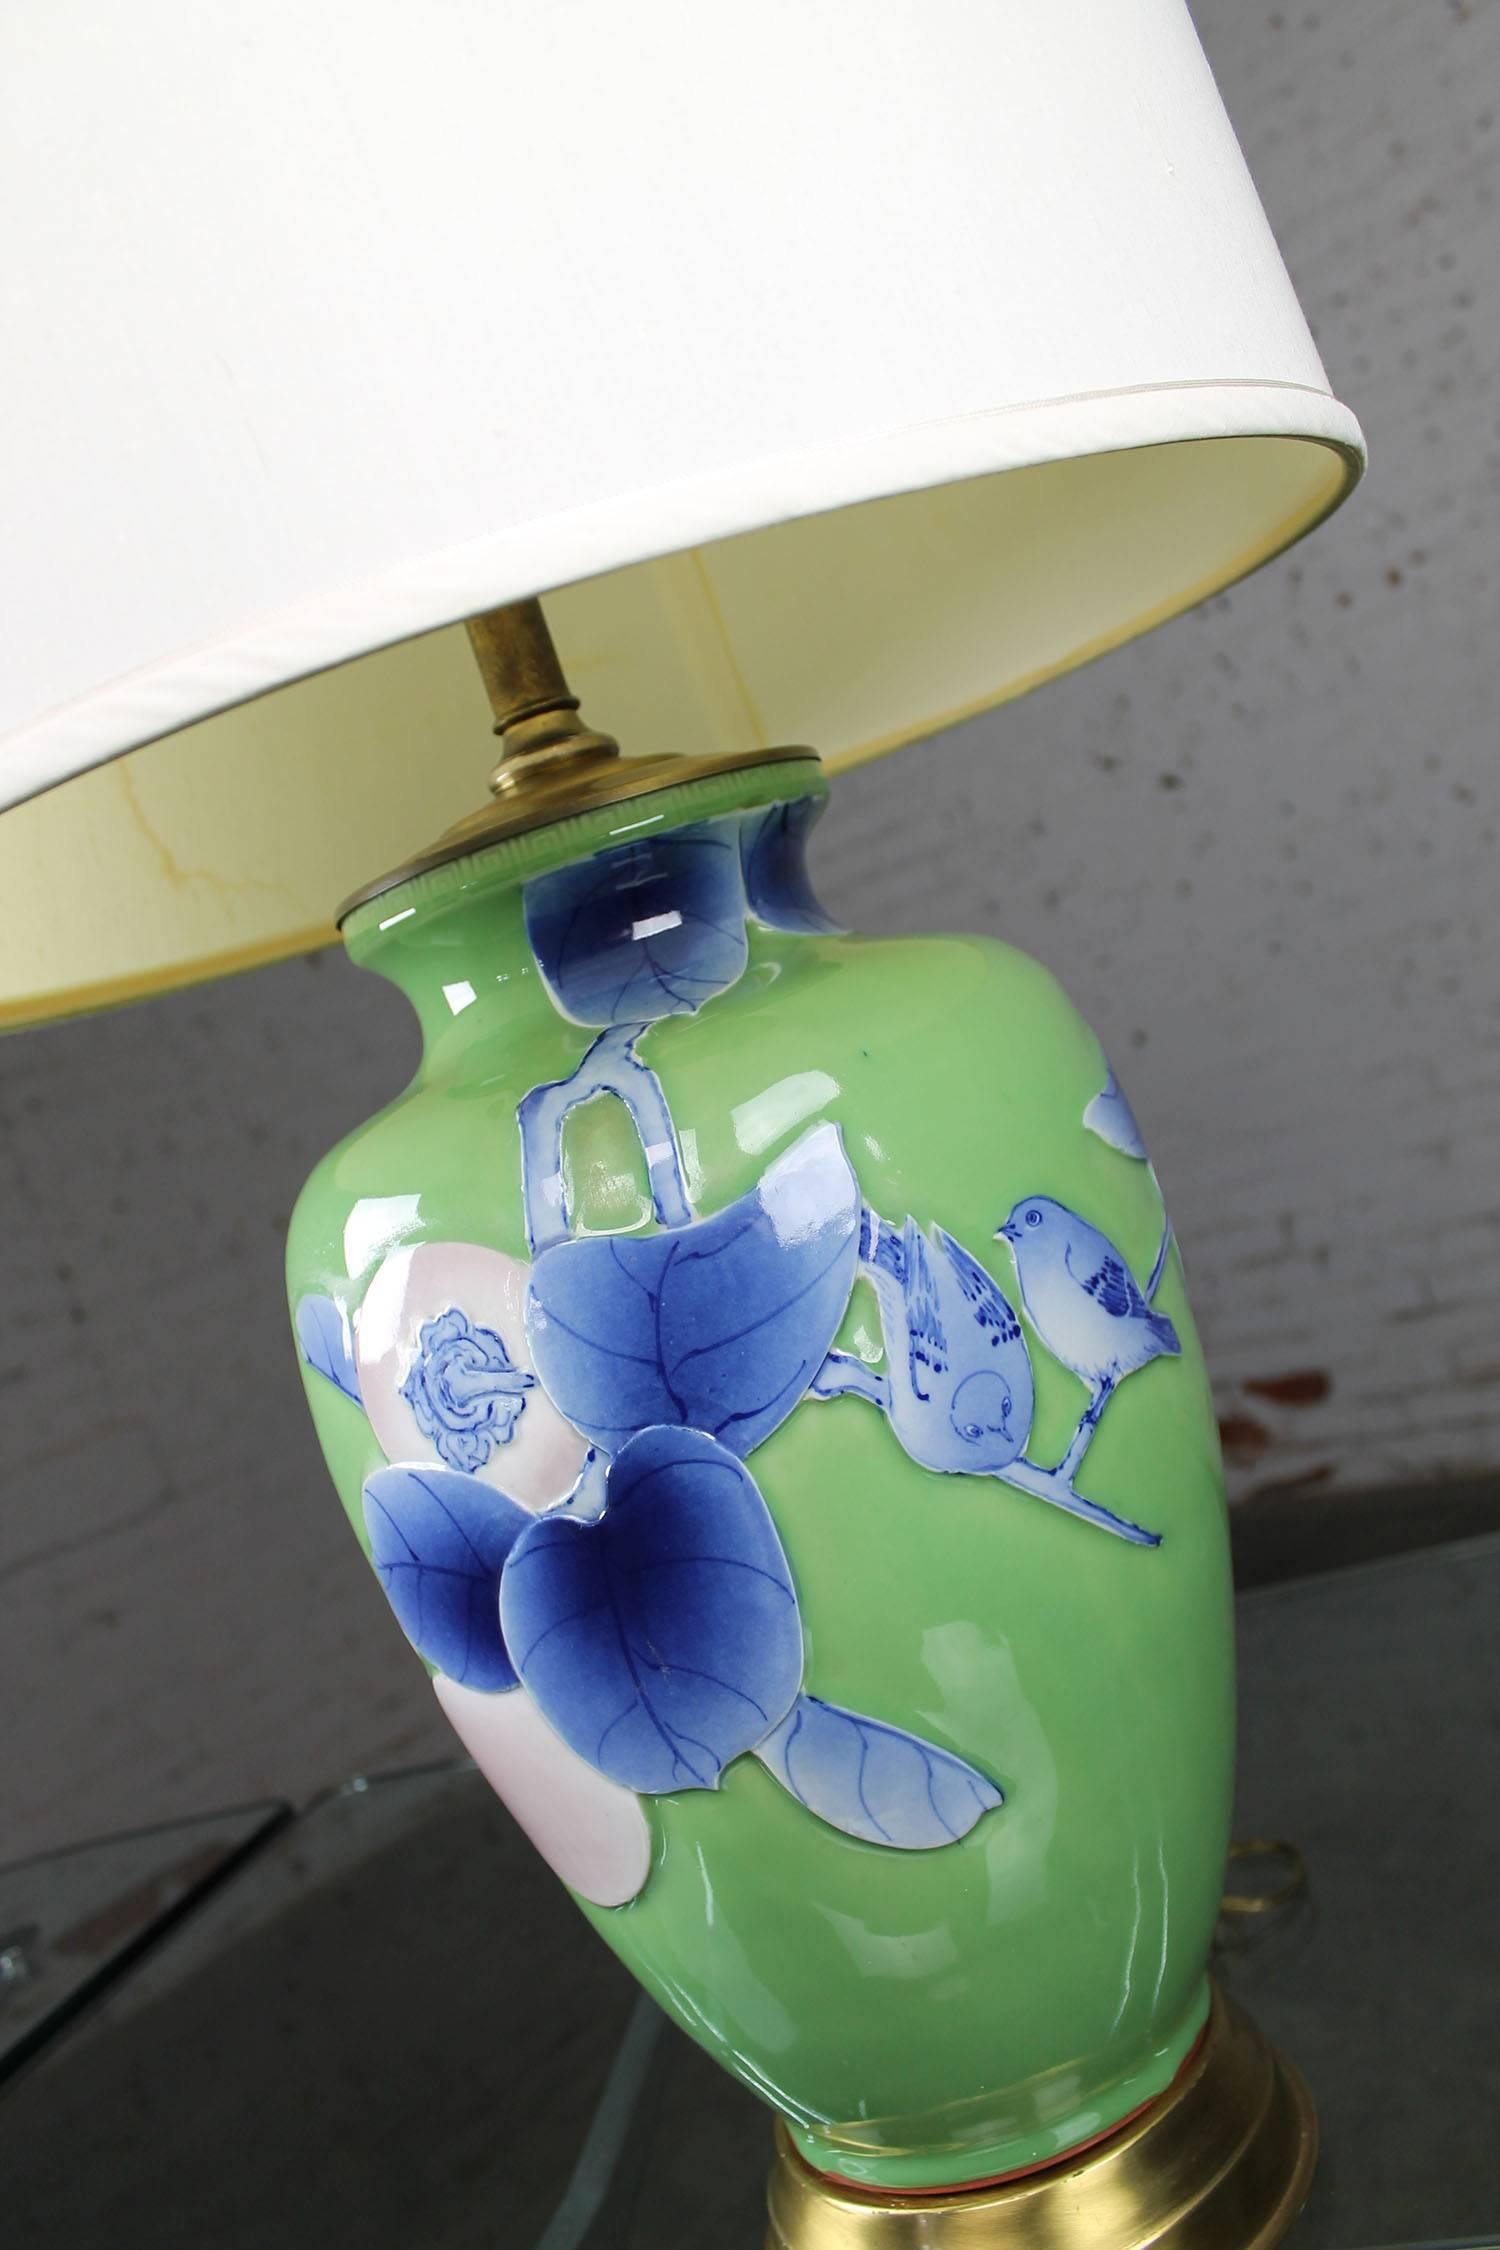 Large and gorgeous 1960s vintage ceramic vase style lamp in apple green with Asian-like design of birds, branches, leaves and fruit in blue and lavender. It is in wonderful vintage condition with no chips, cracks or crazing. The original shade is